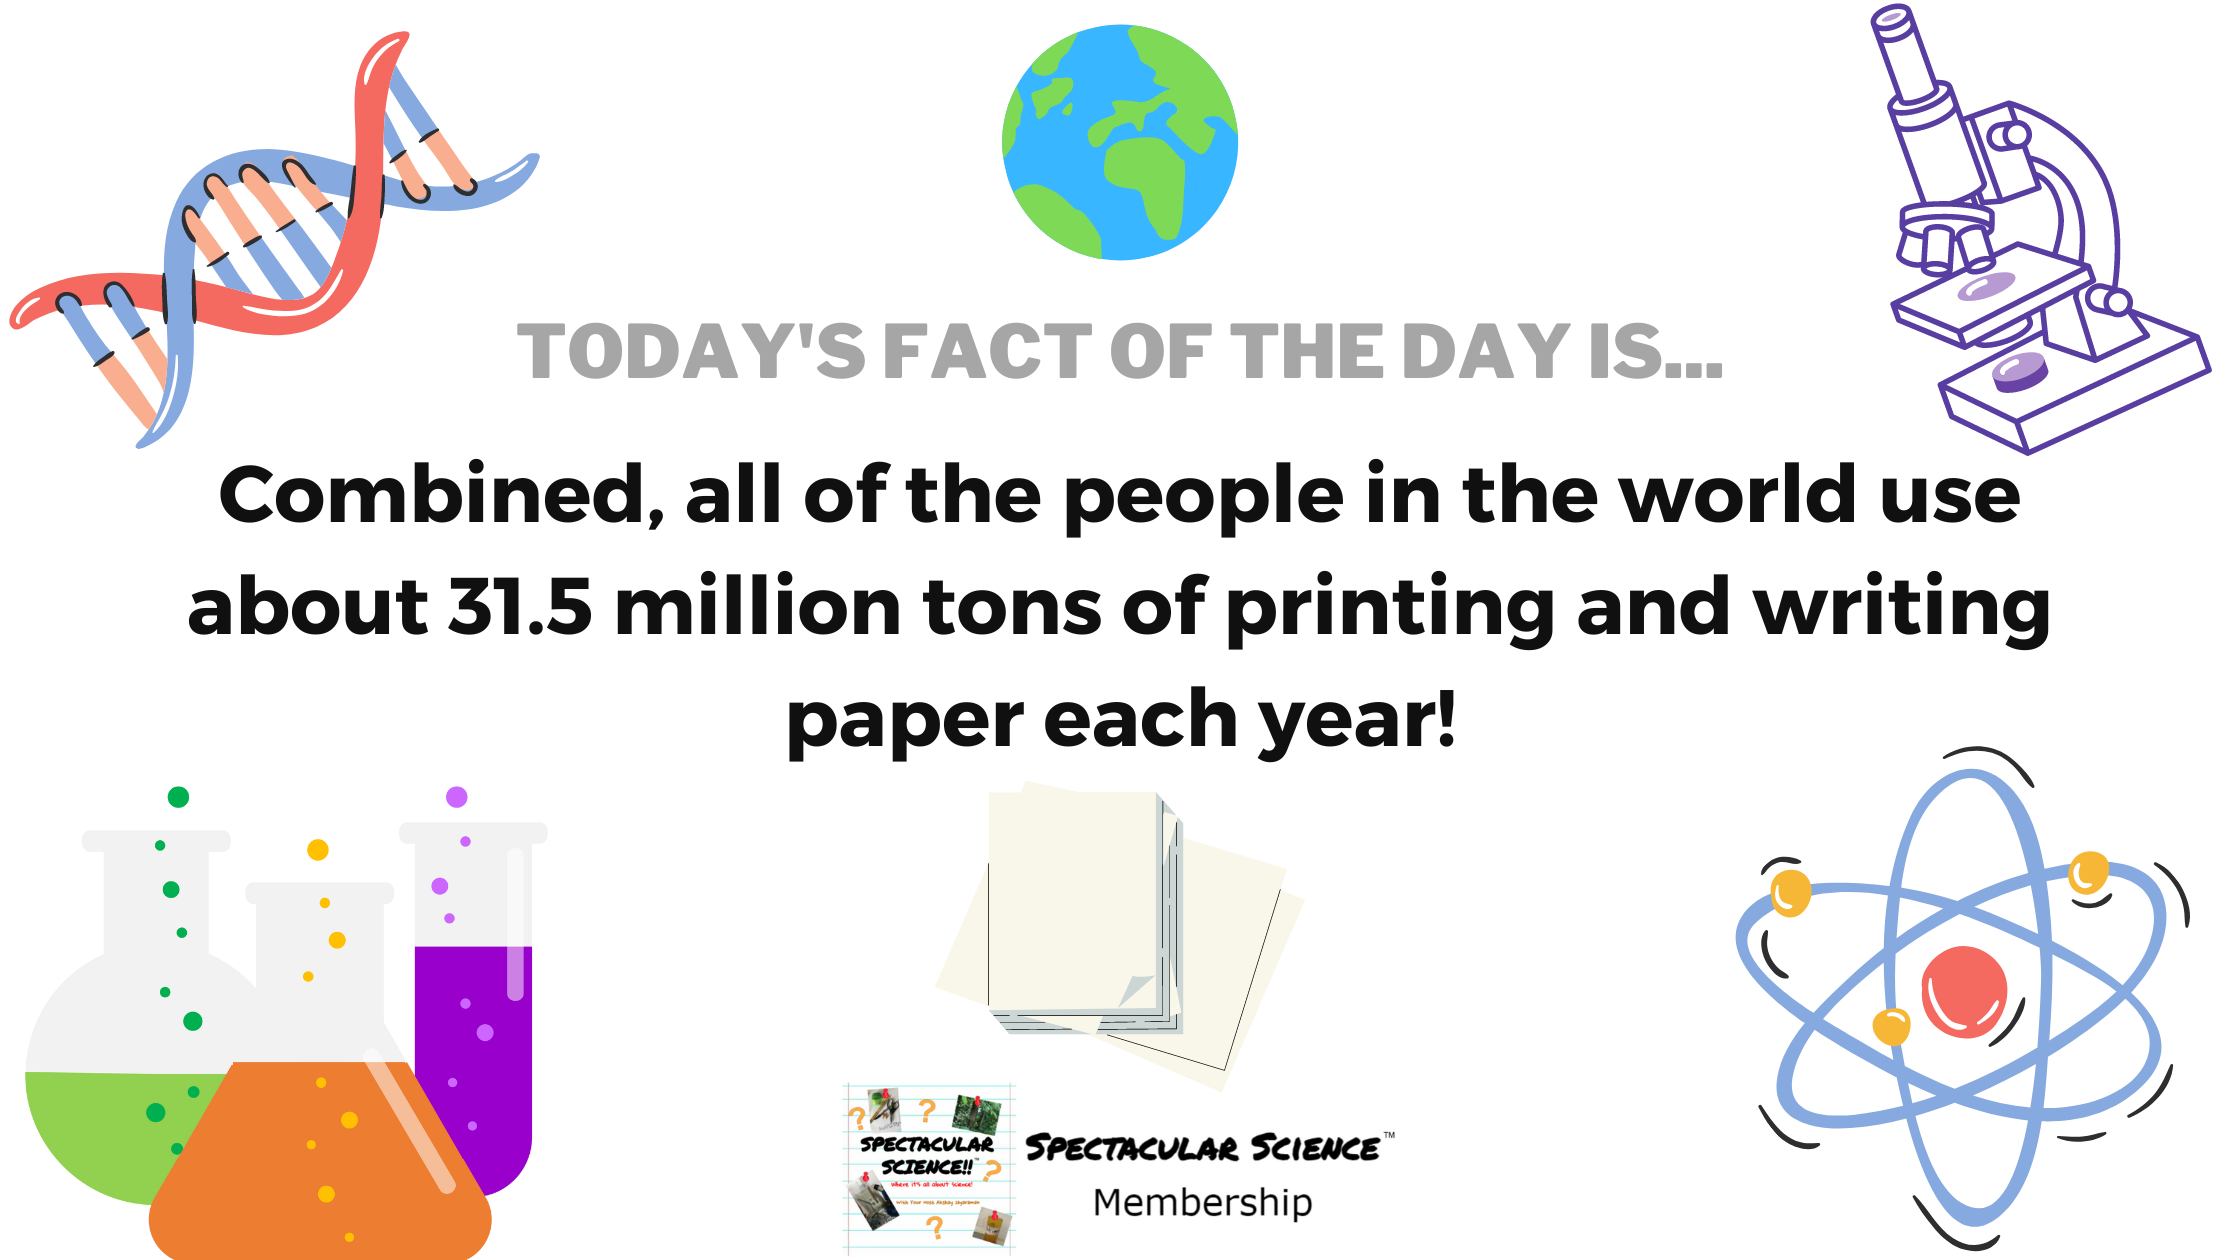 Fact of the Day Image November 15th